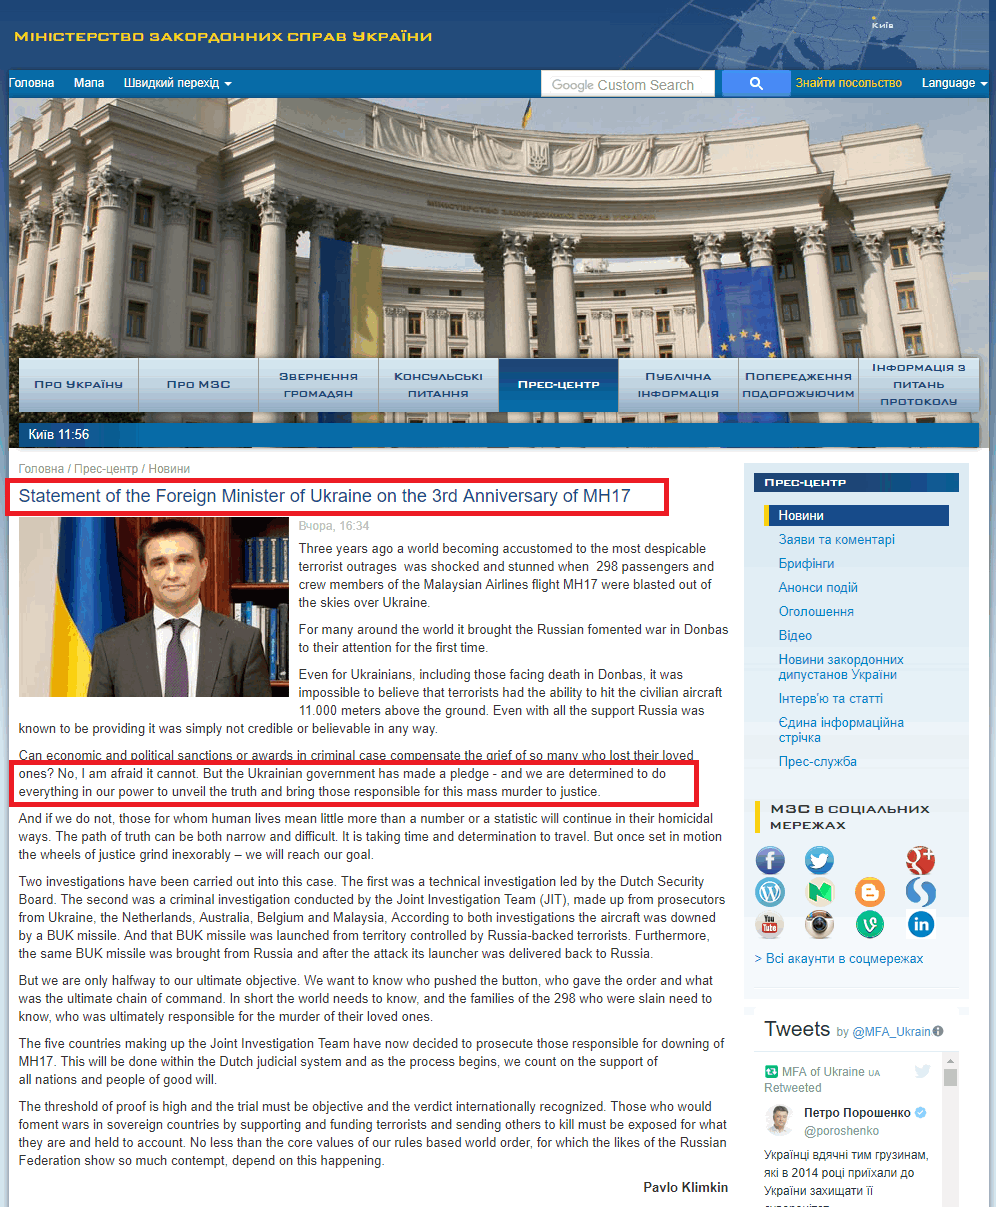 http://mfa.gov.ua/ua/press-center/news/58617-statement-of-the-foreign-minister-of-ukraine-on-the-3rd-anniversary-of-mh17